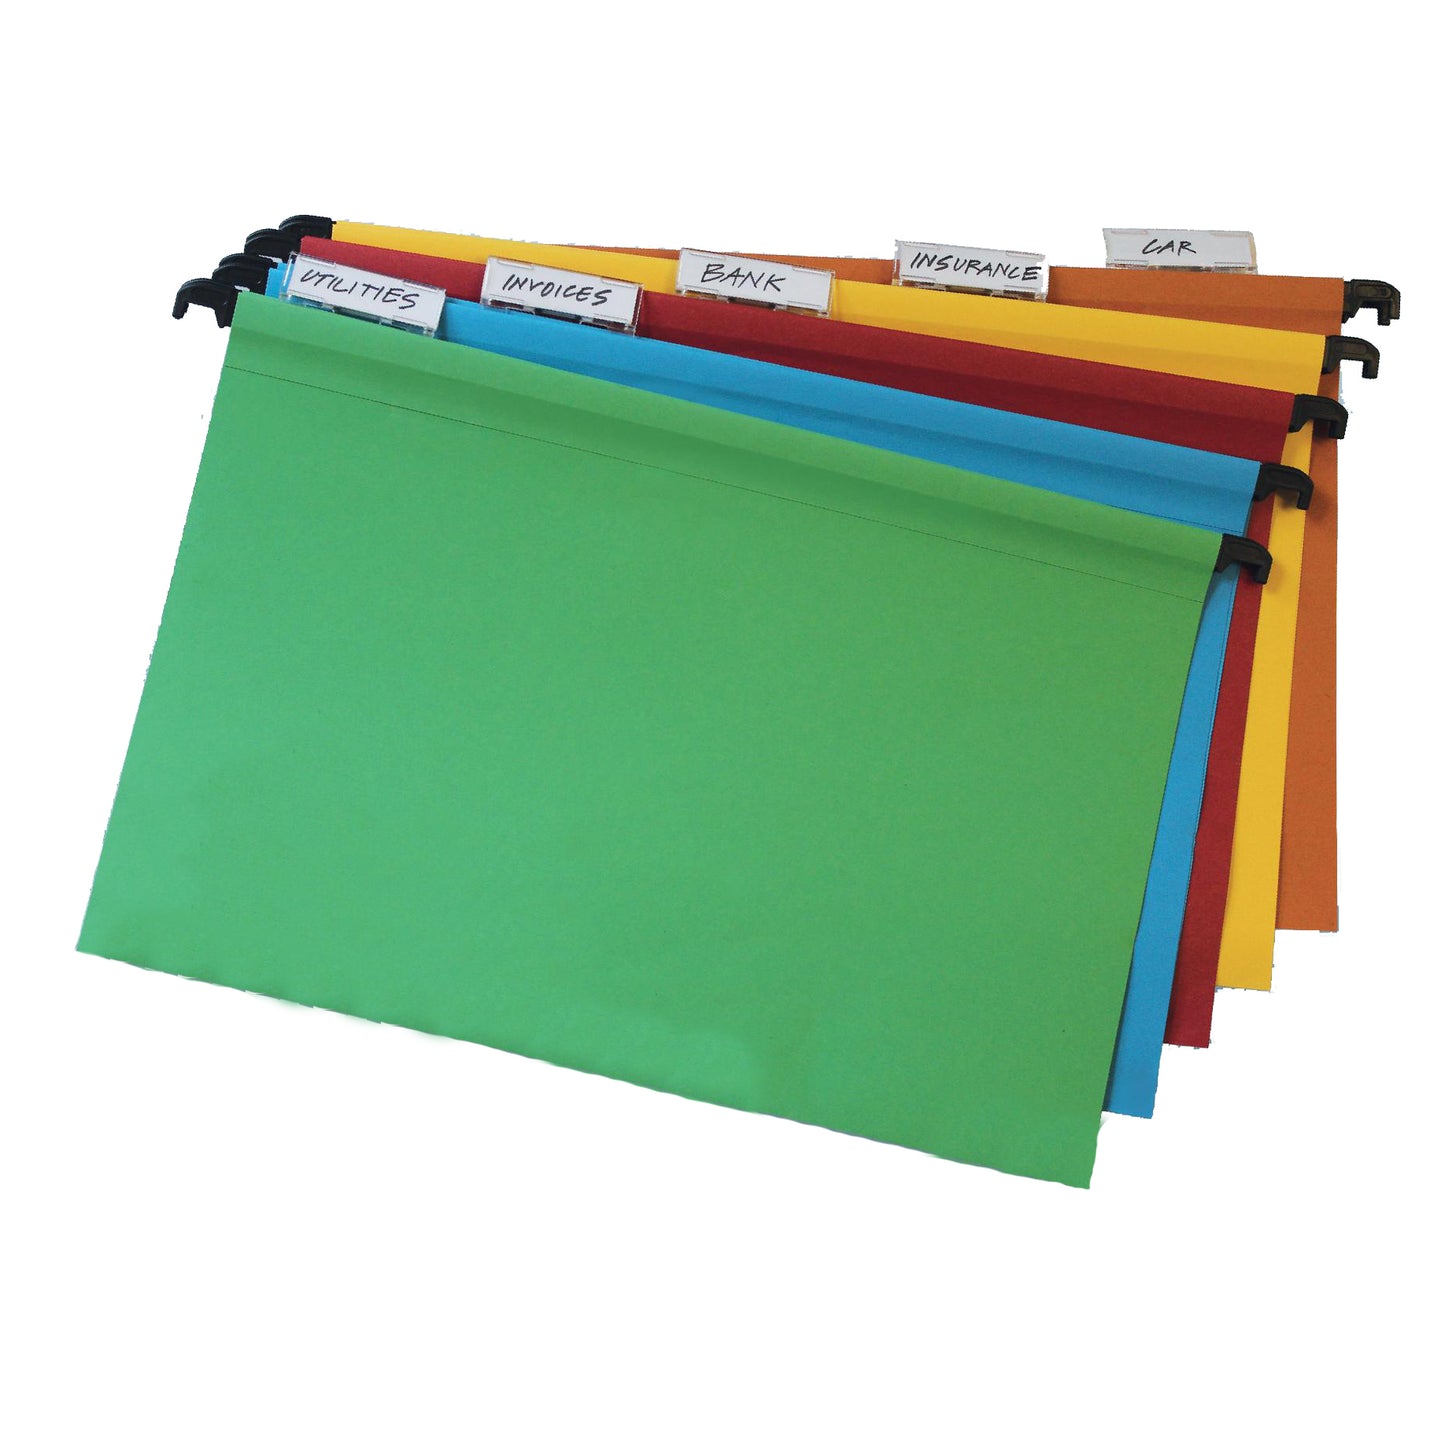 A pack of 10 A4-sized assorted color suspension files with clip-on index tabs and inserts, showcasing labels such as 'Utilities,' 'Invoices,' 'Bank,' 'Insurance,' and 'Car' for organization and filing.